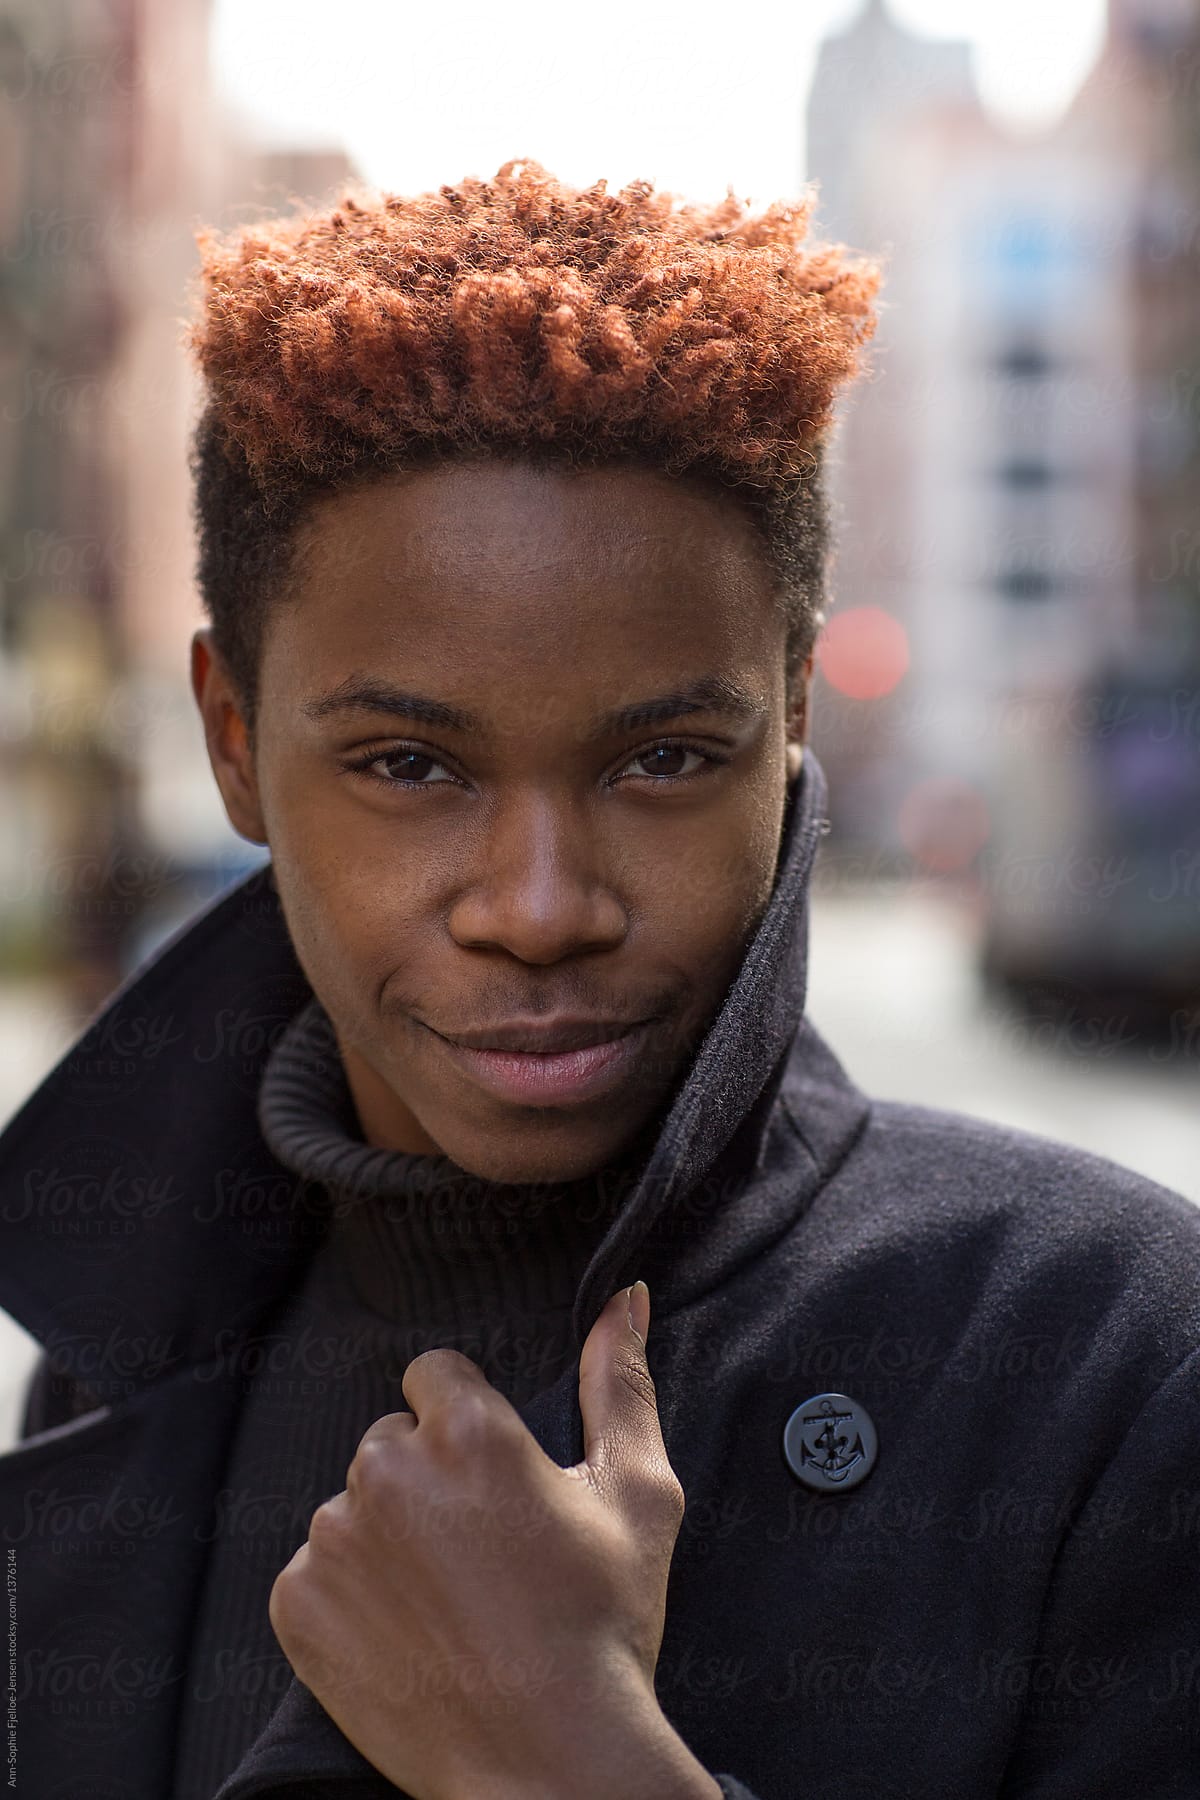 A Young Black Man With Red Hair.